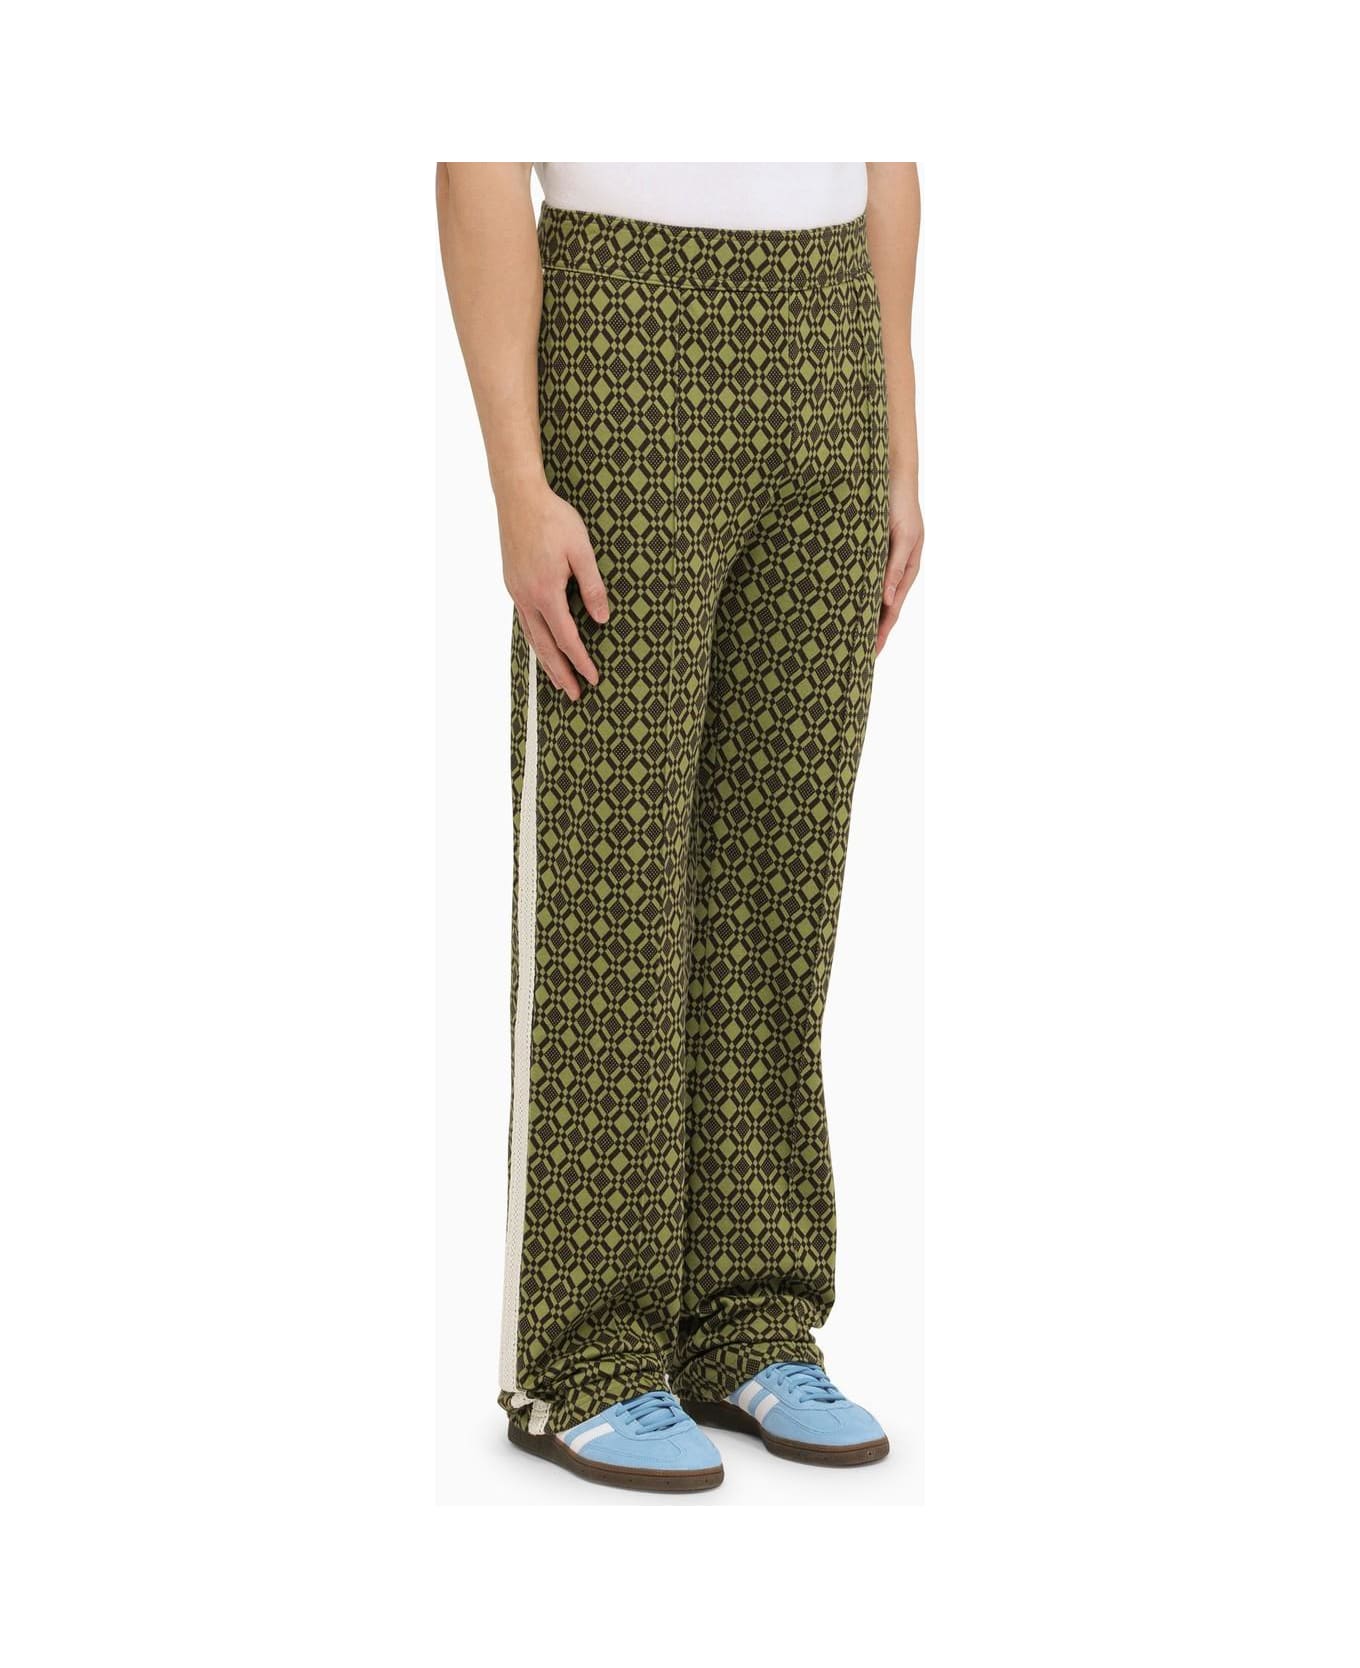 Wales Bonner Olive Green\/brown Cotton Power Sports Trousers - 7800 OLIVE AND DARK BROWN